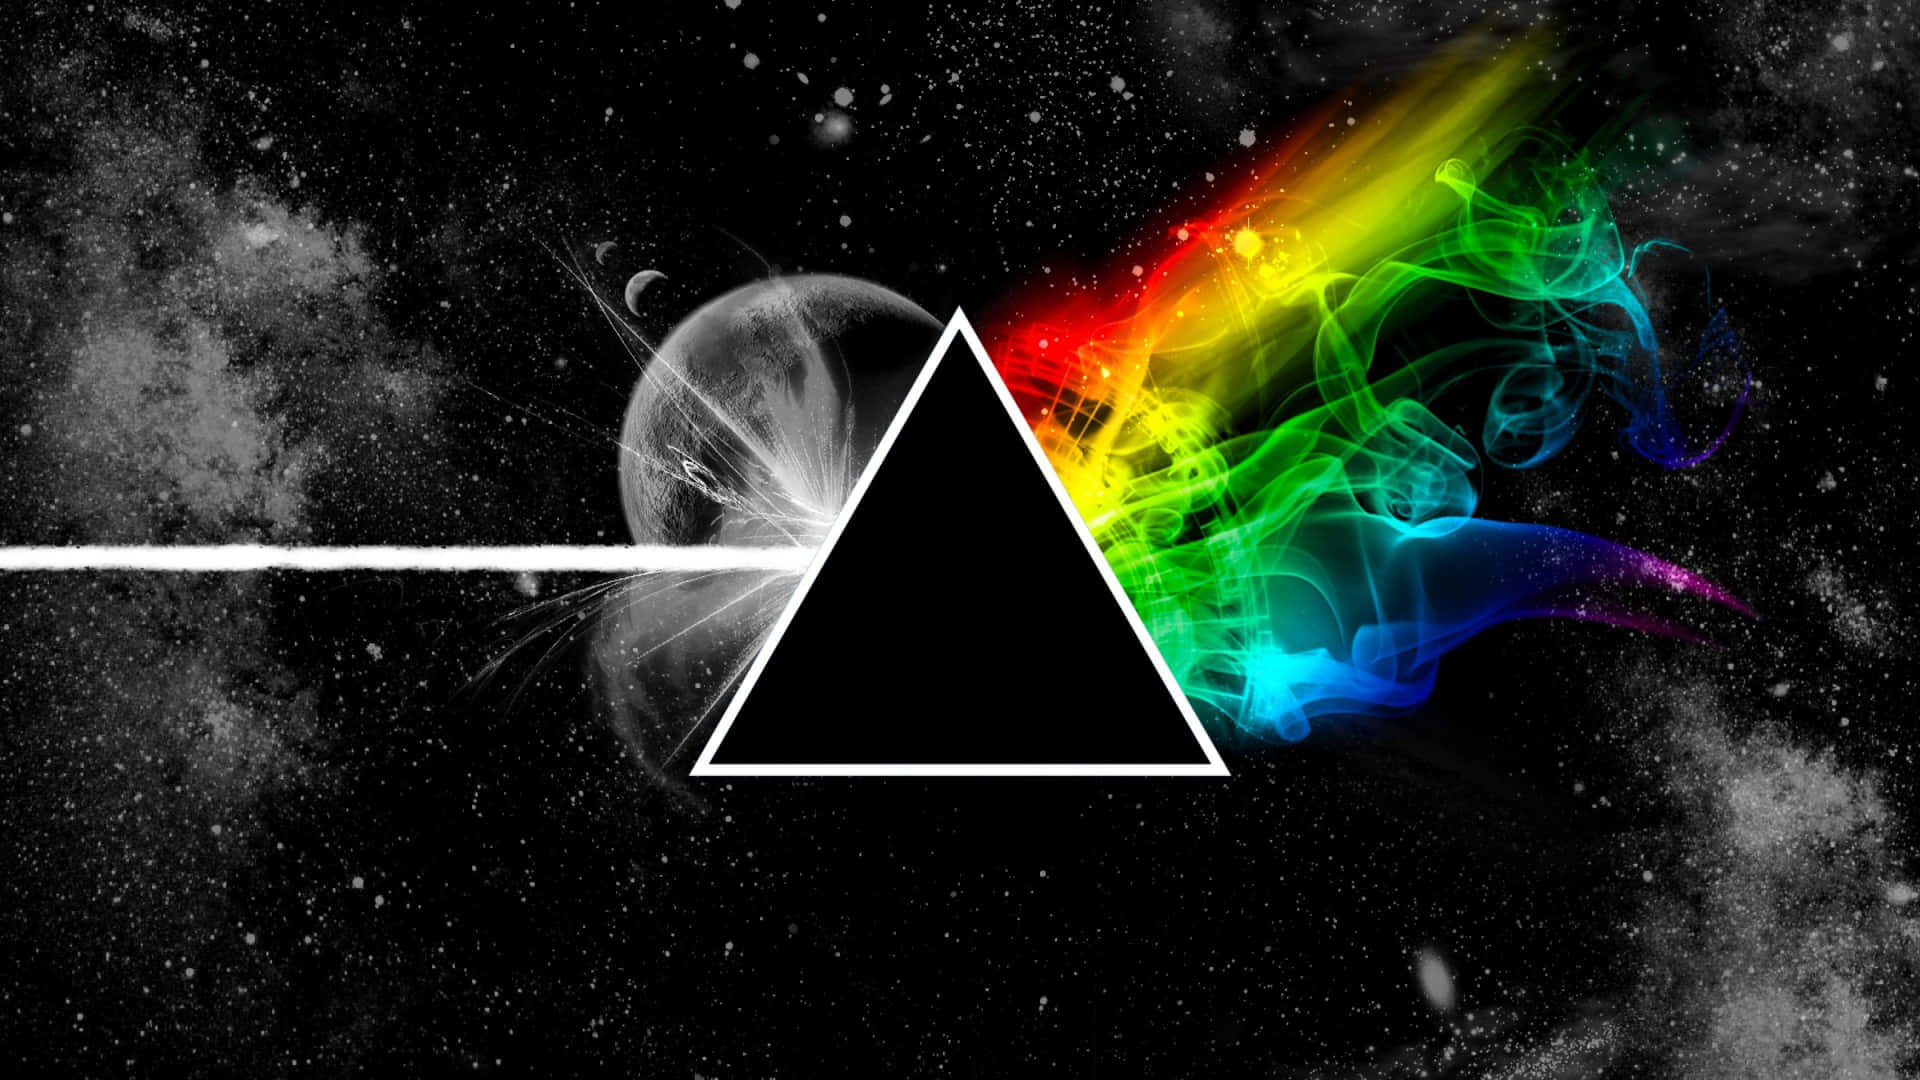 "A Stunning Tribute to 'Dark Side of the Moon' by Pink Floyd" Wallpaper